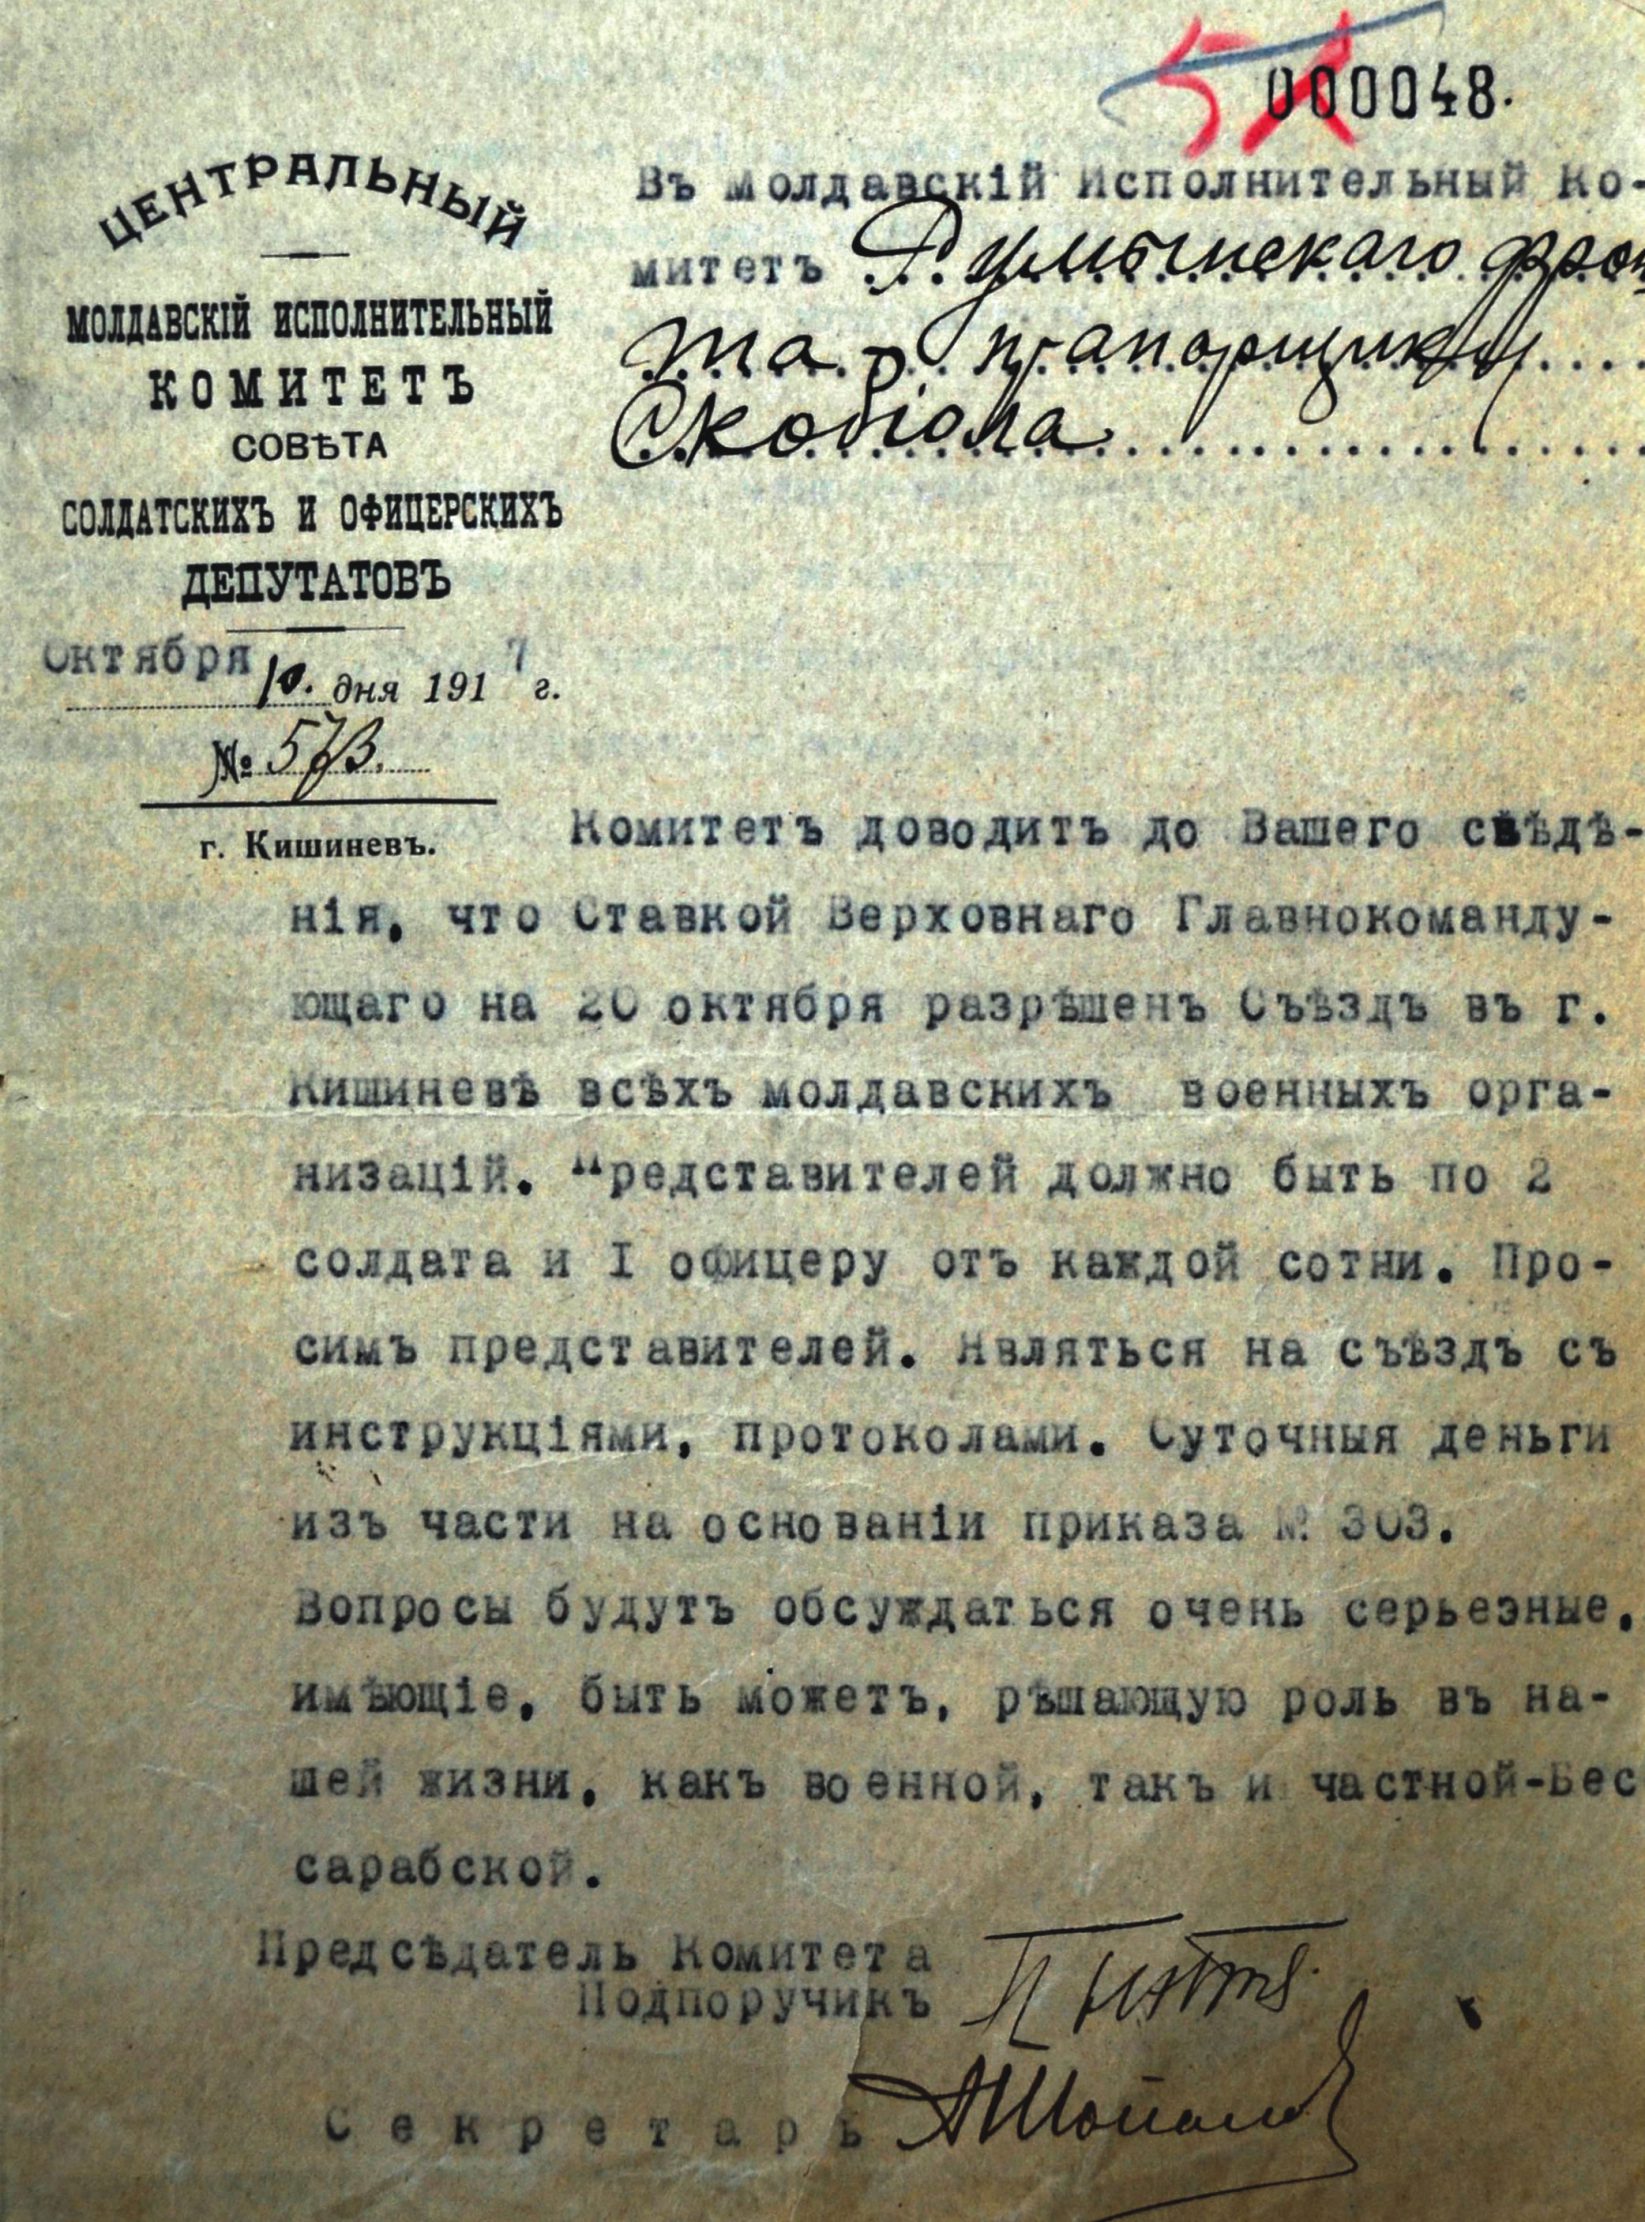 The members of the Coalition Committee of the representatives of the government, public and credit institutions are willing to subordinate the "Country Councils", but for a better and more efficient collaboration with the new legitimate authorities of Bessarabia, they calls for the delegation of representatives of the Bessarabian Parliament factions to the general meeting of the delegations of all these institutions to be held on November 30, 1917 in the premises of the National Bank of Romania (ANRM)